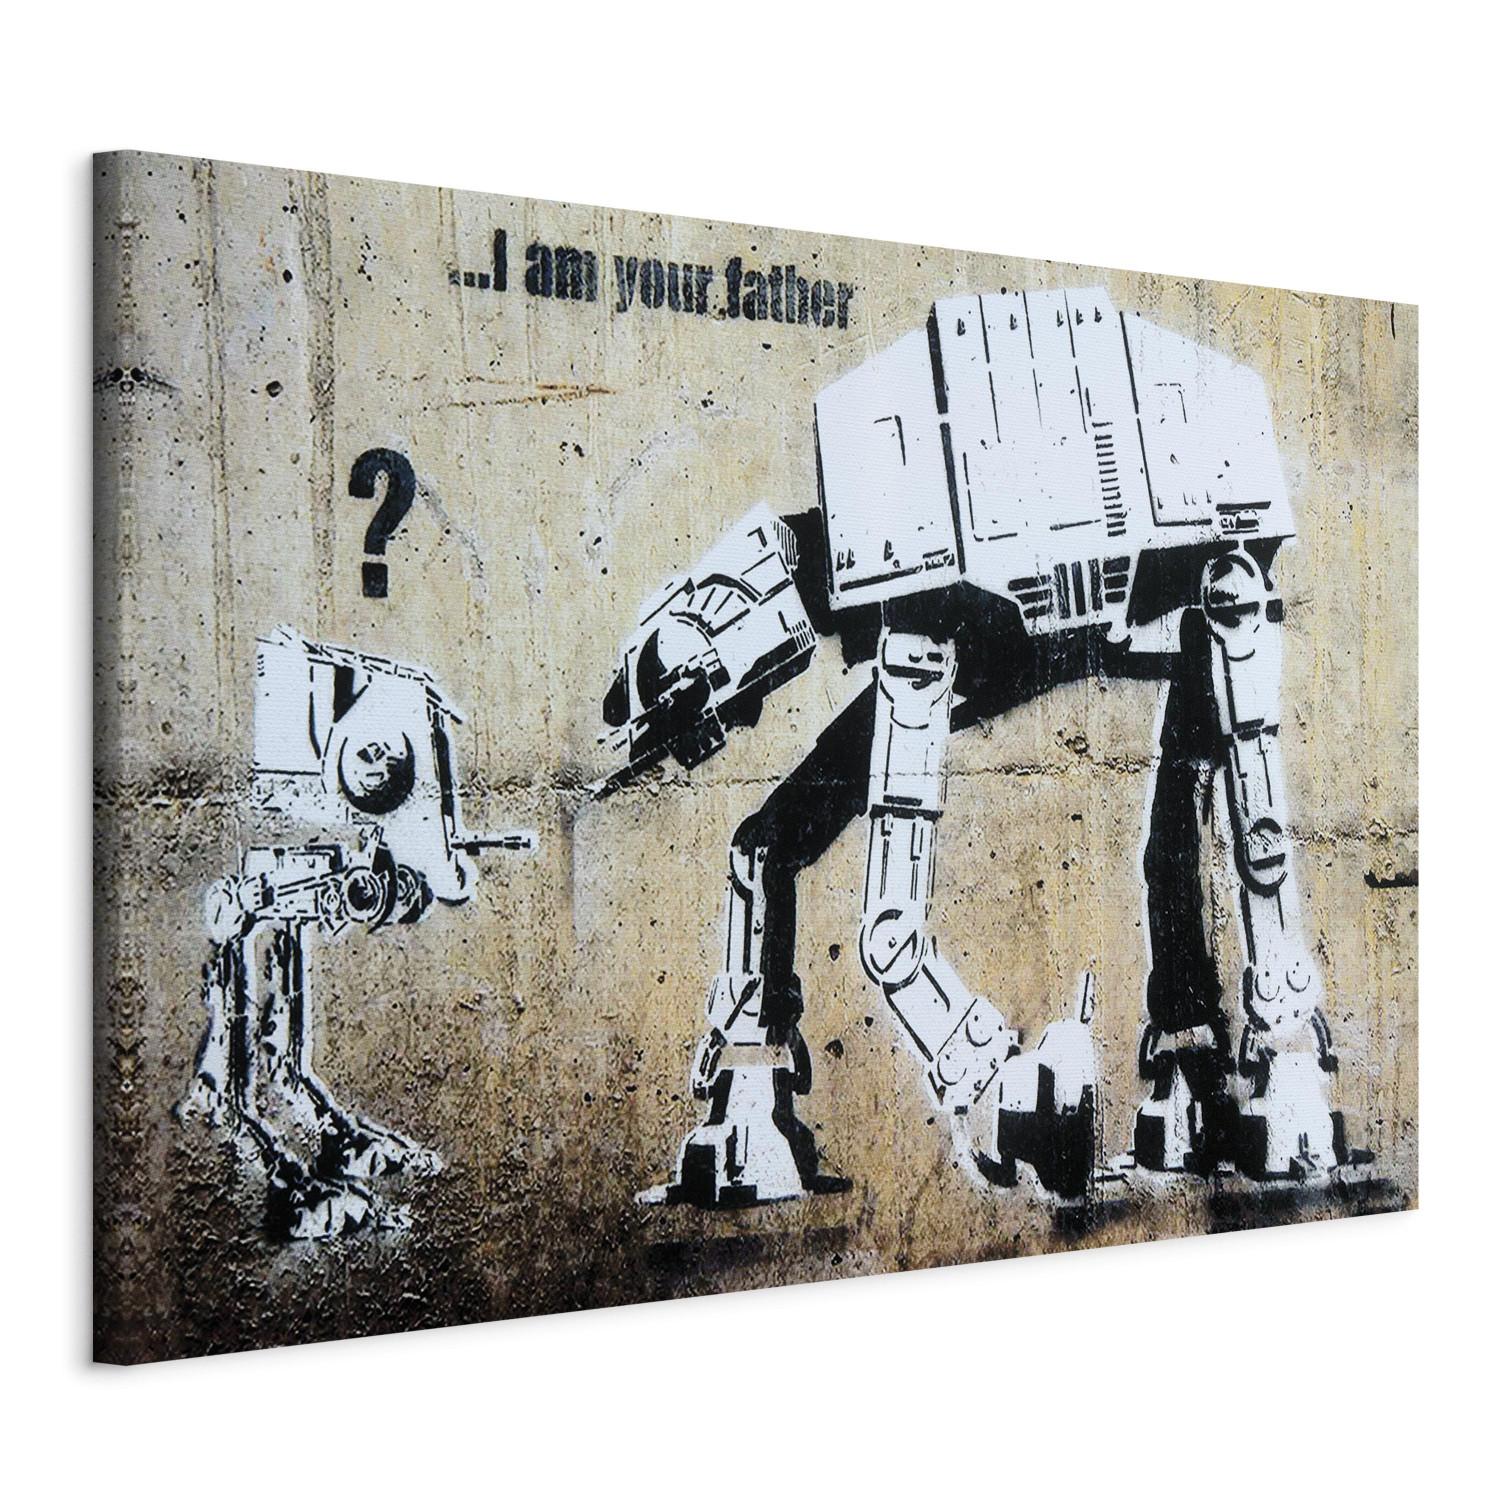 Cuadro I Am Your Father by Banksy